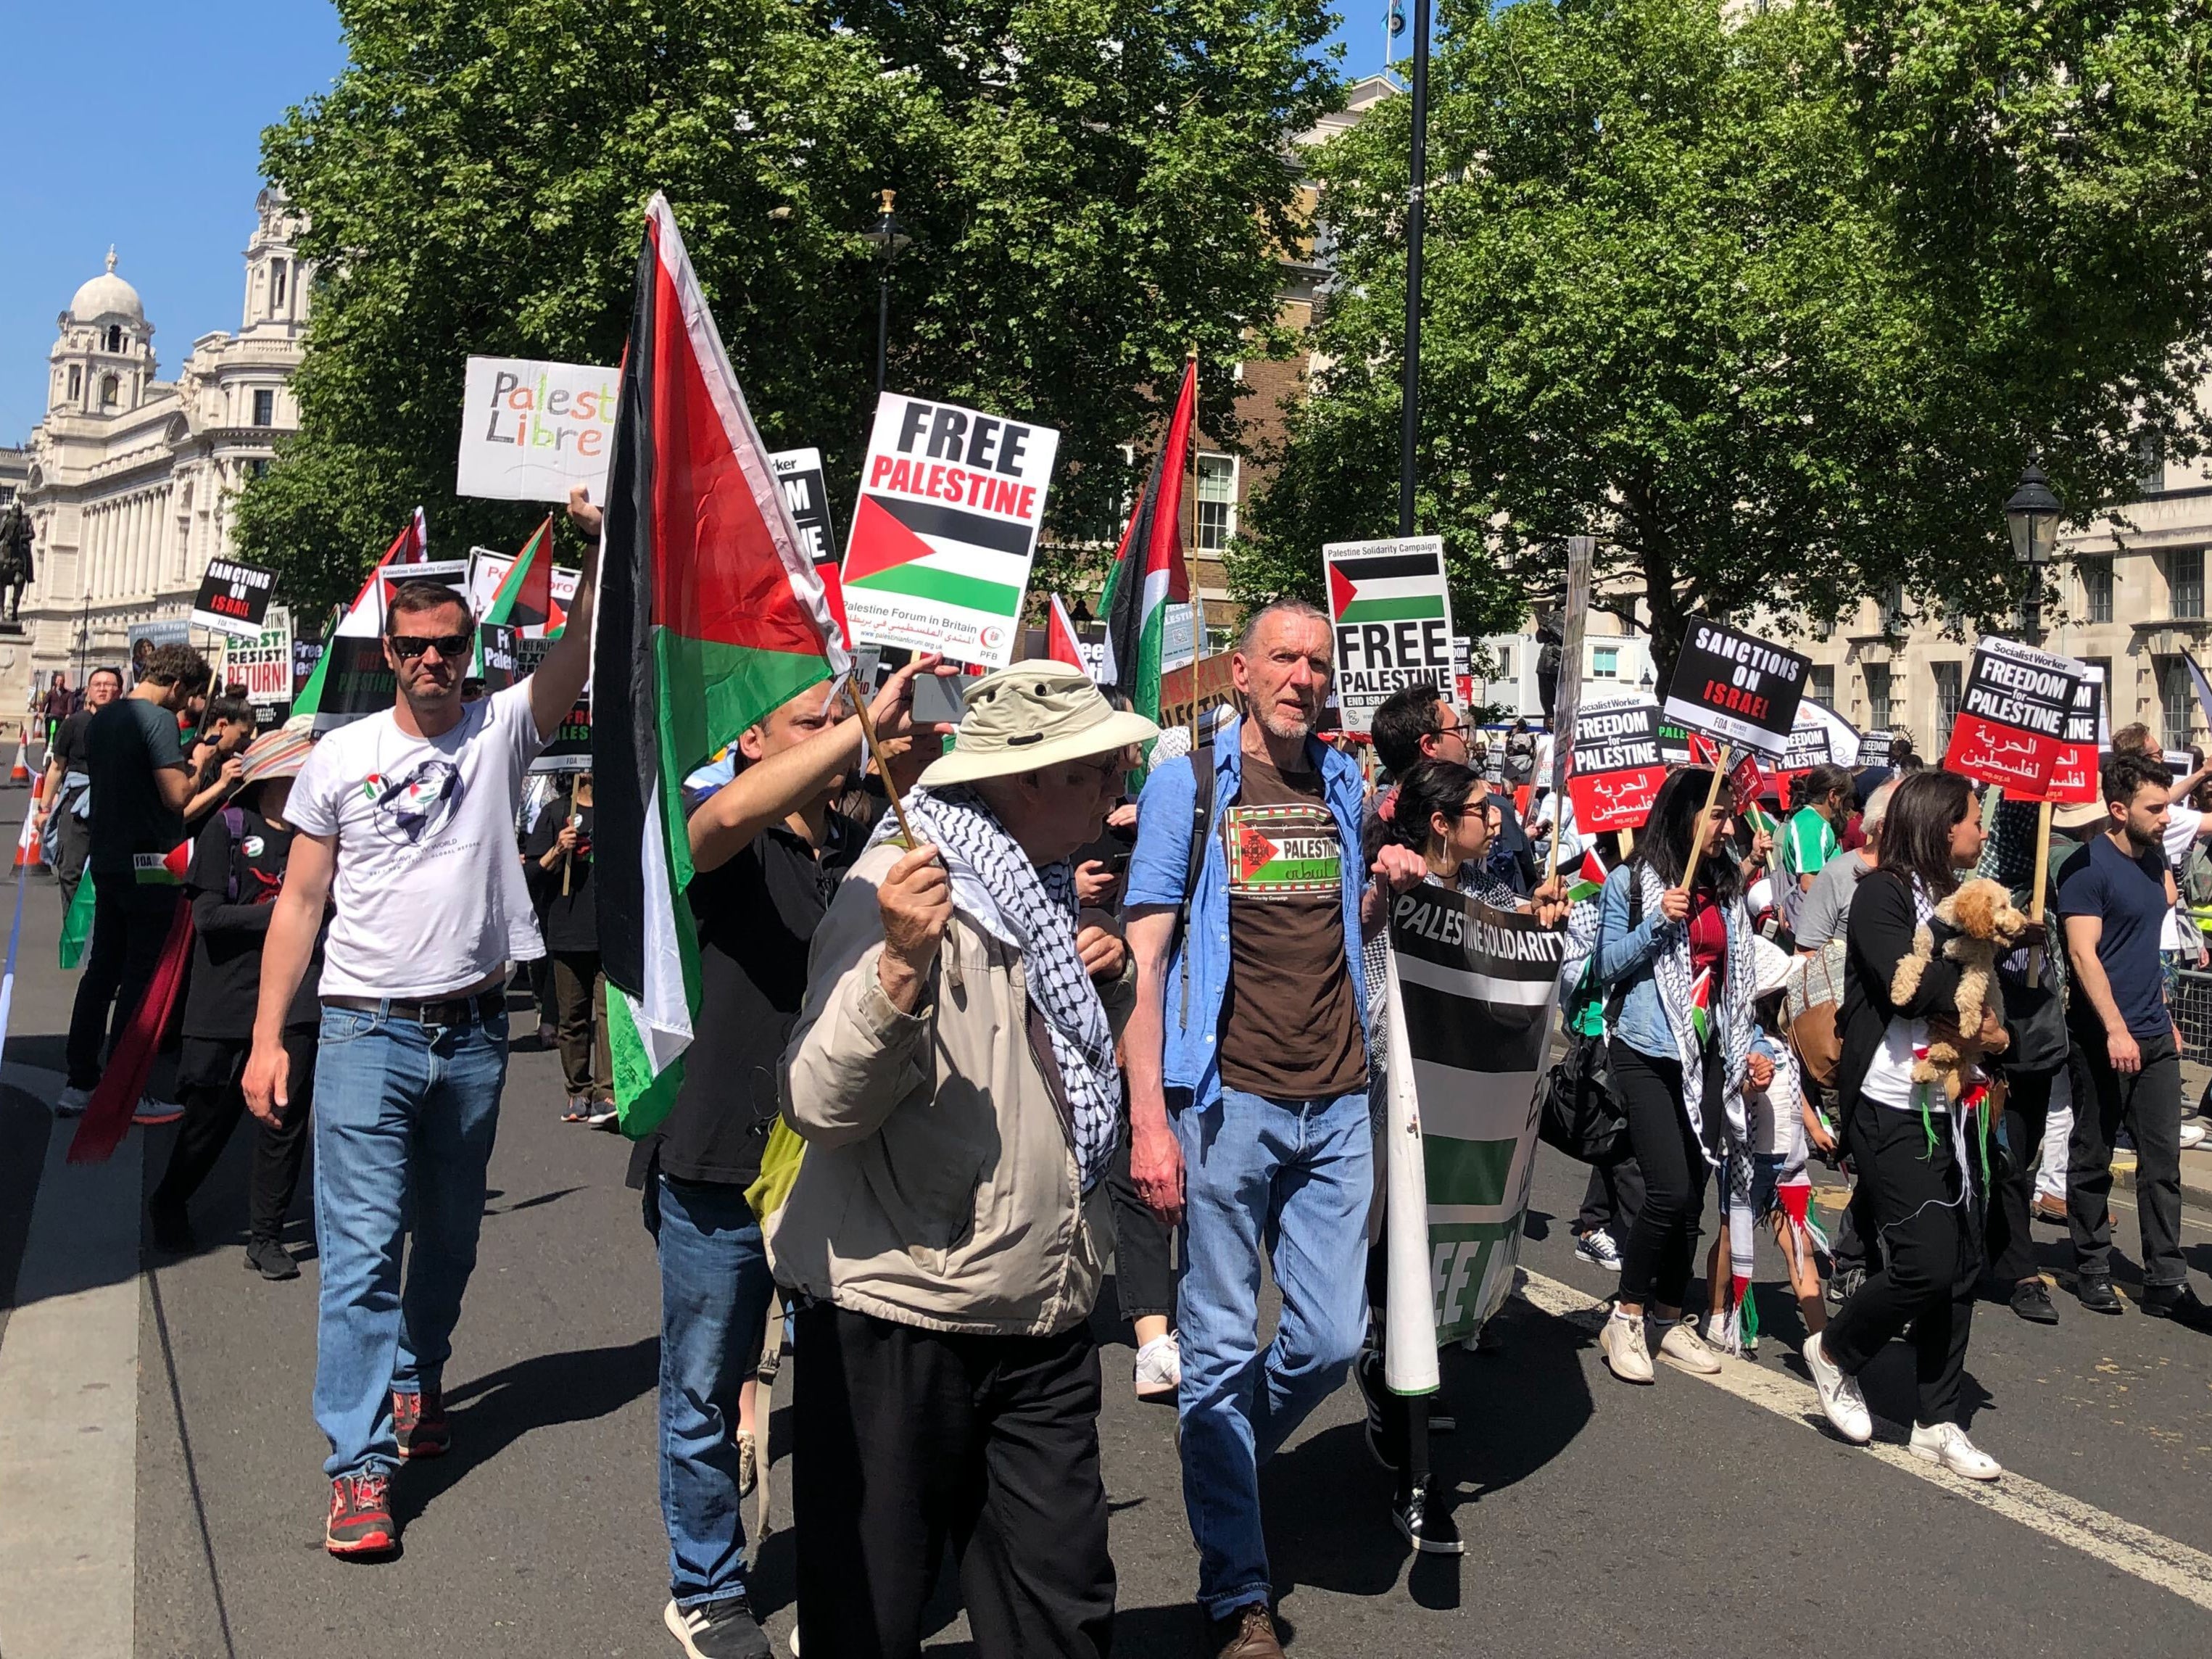 Protesters marched through central London in solidarity with the Palestinian people